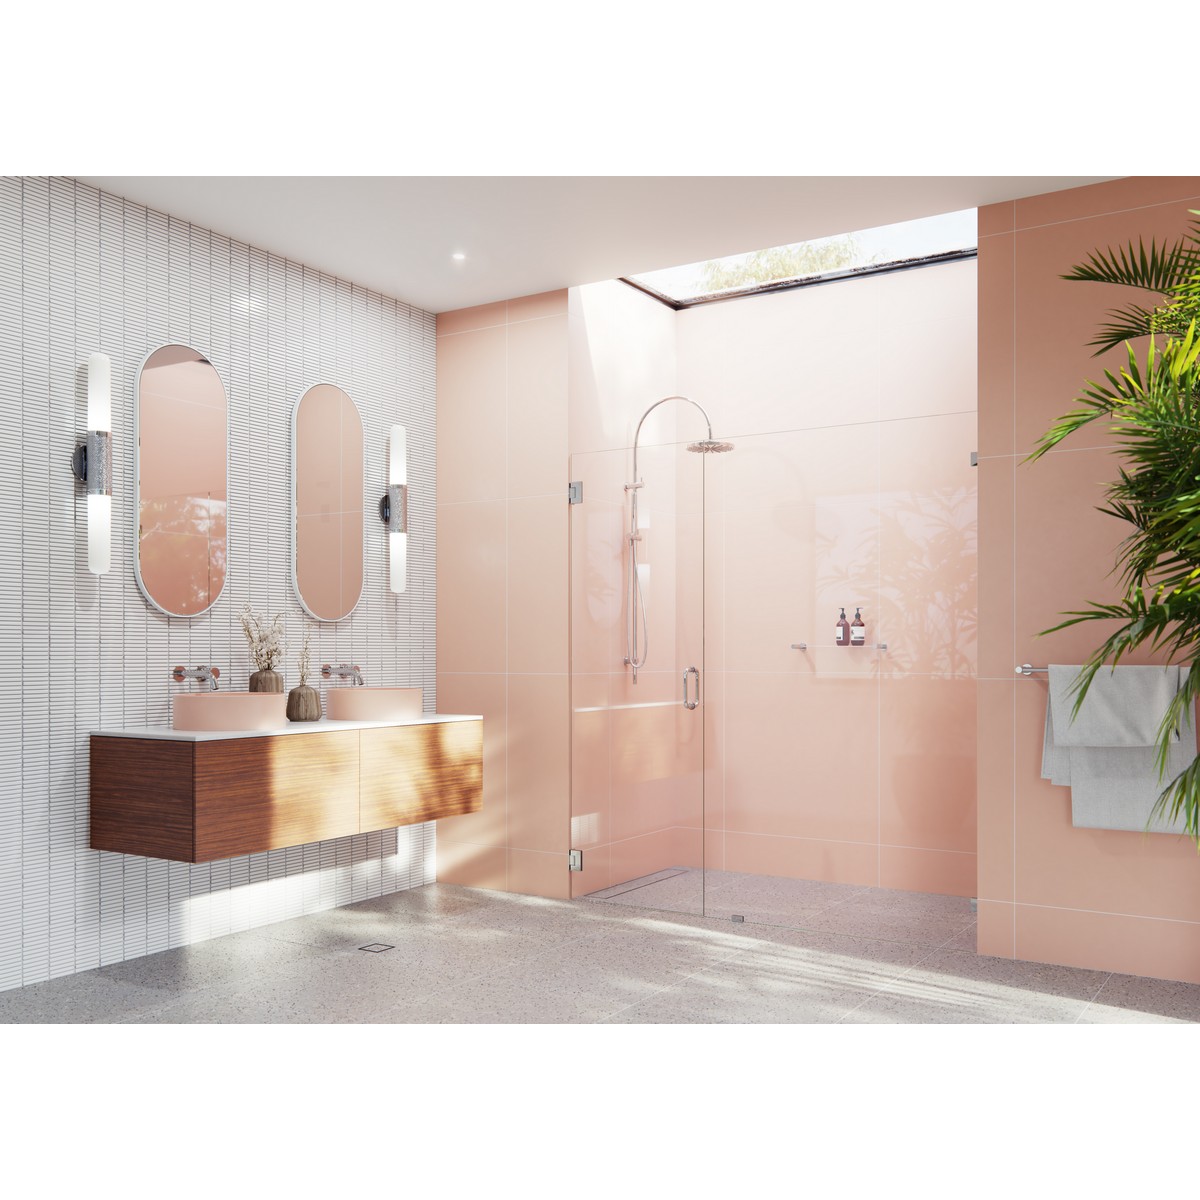 GLASS WAREHOUSE GW-WH-65 ILLUME 65 W X 78 H WALL HINGED FULLY FRAMELESS GLASS SHOWER ENCLOSURE